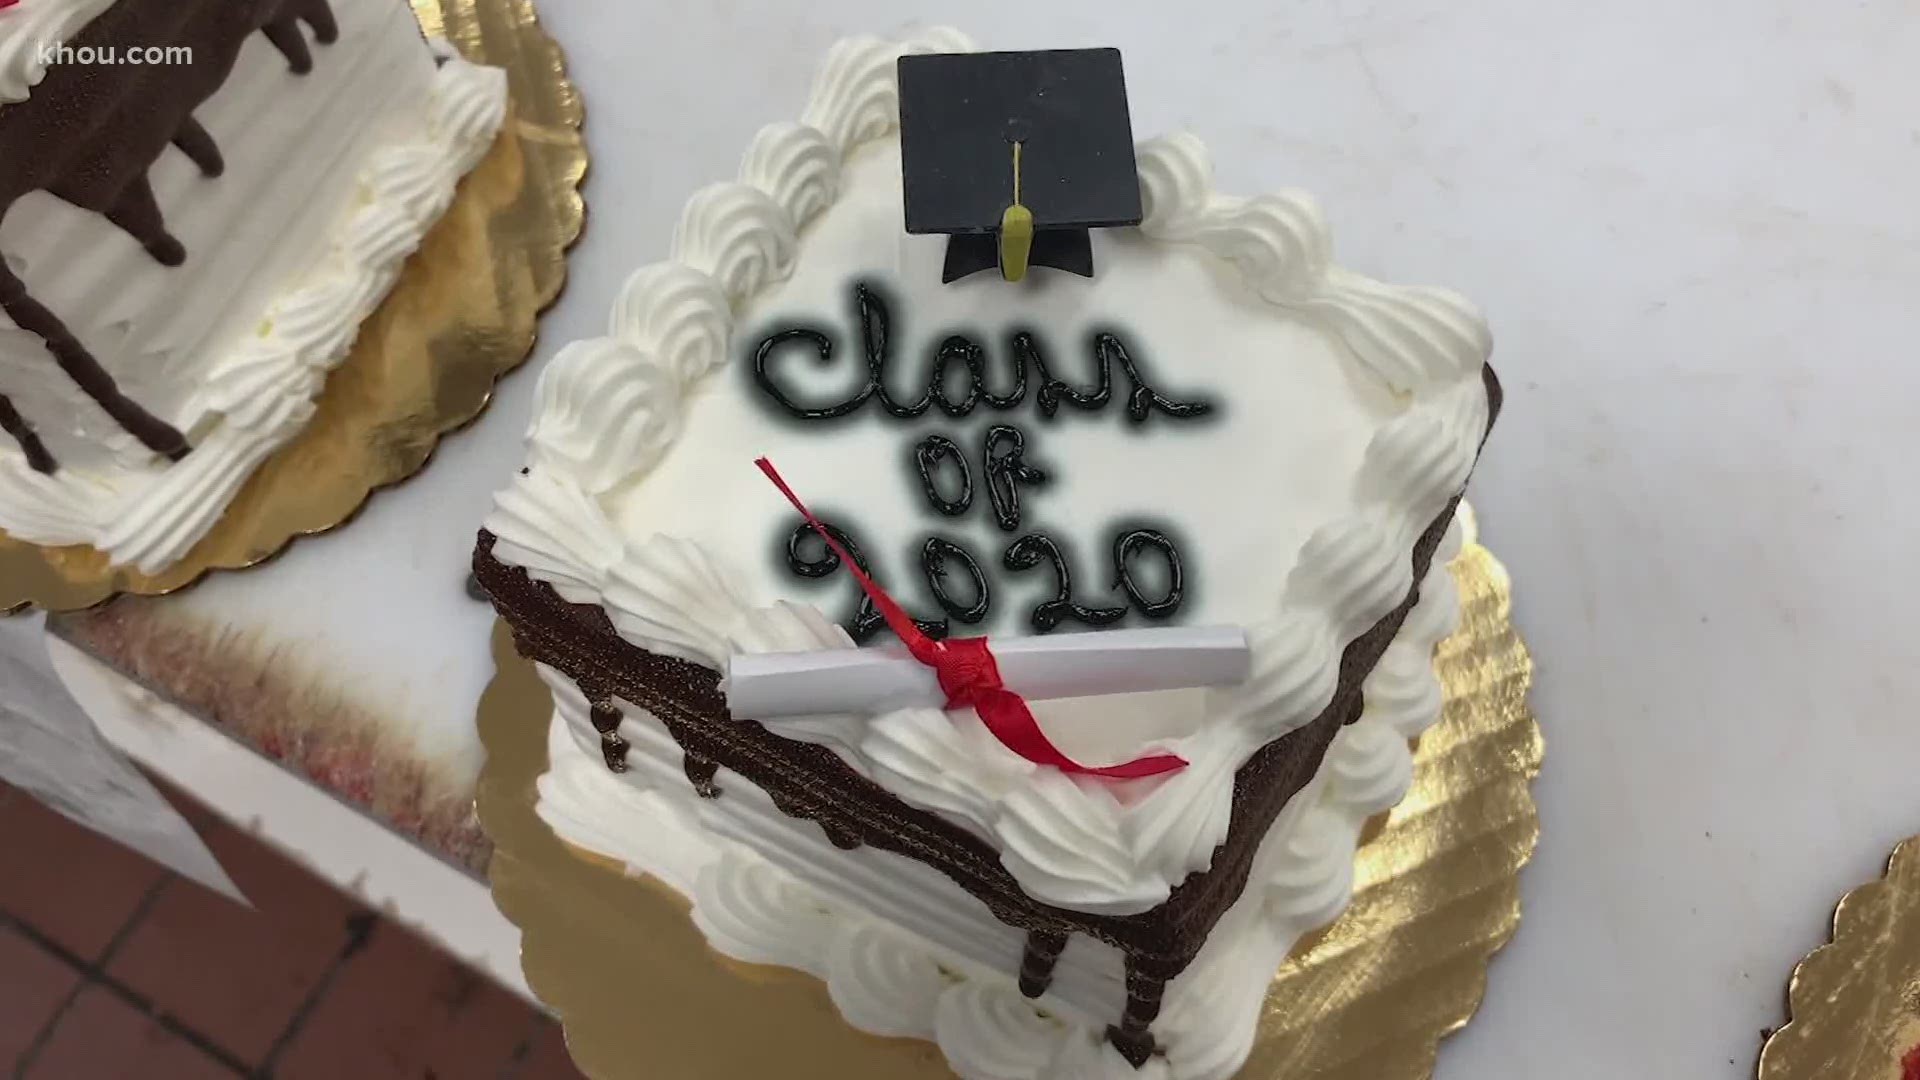 A Houston bakery is cooking up something special for graduates who had their celebration plans spoiled by the coronavirus pandemic.